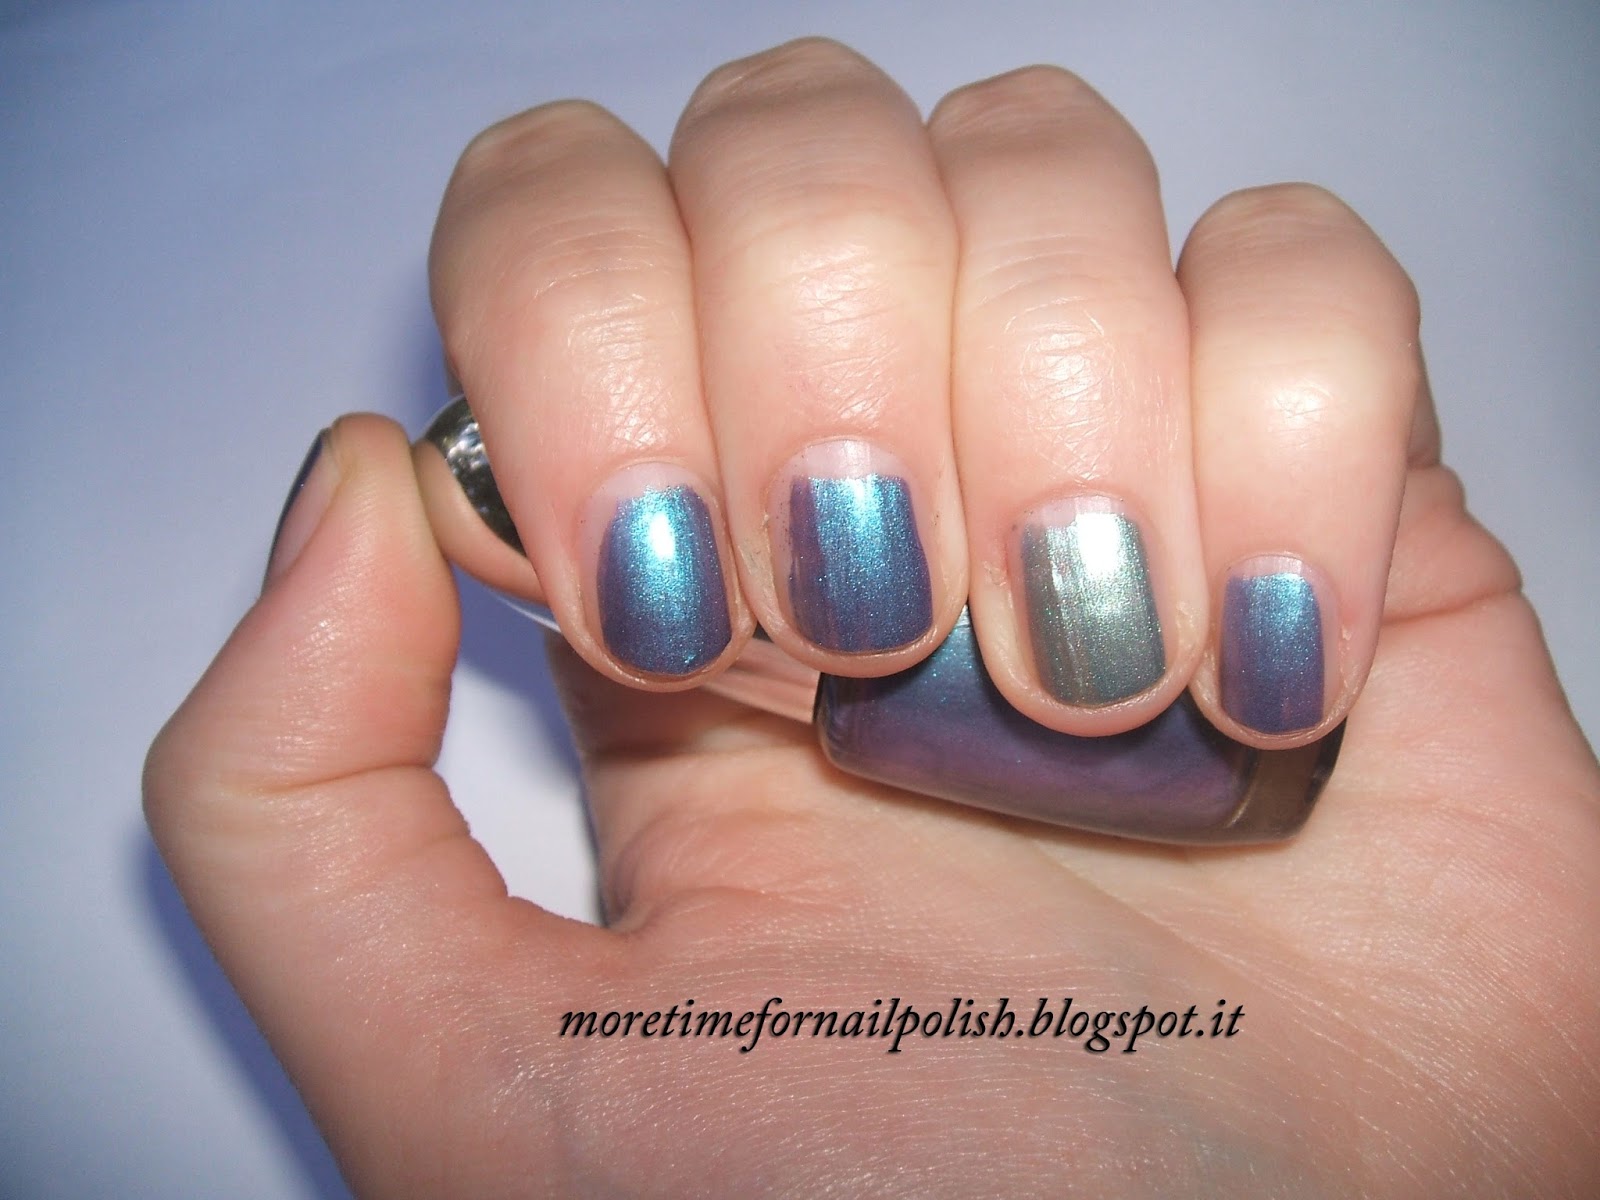 2. Iridescent Nail Polish Shades by Sinful Colors - wide 2